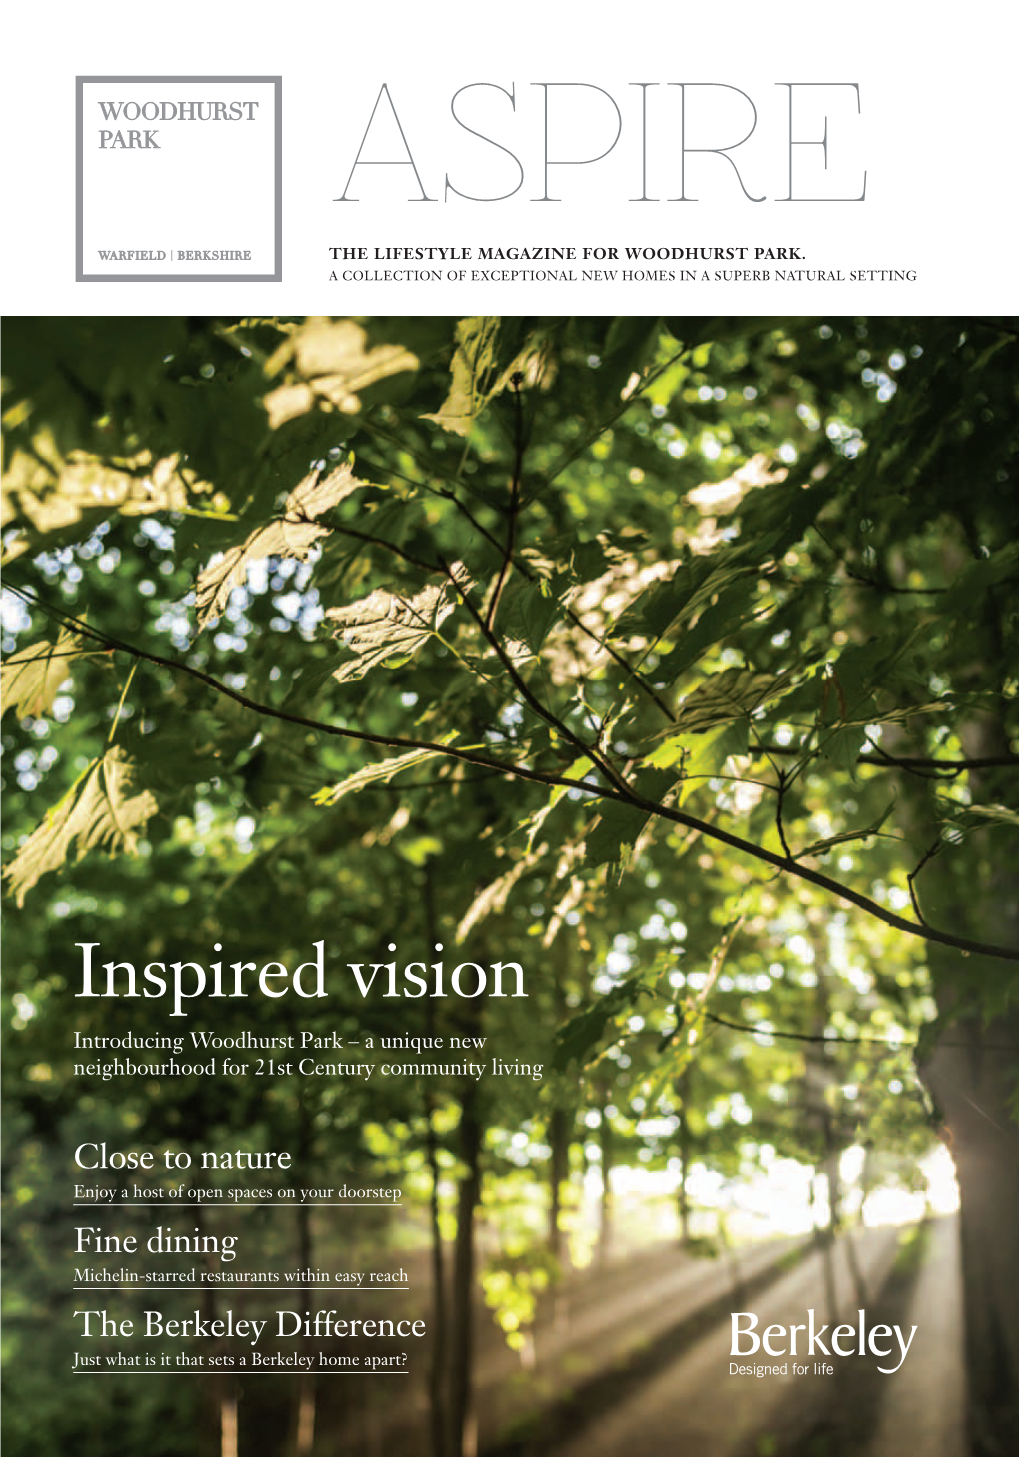 Inspired Vision Introducing Woodhurst Park – a Unique New Neighbourhood for 21St Century Community Living